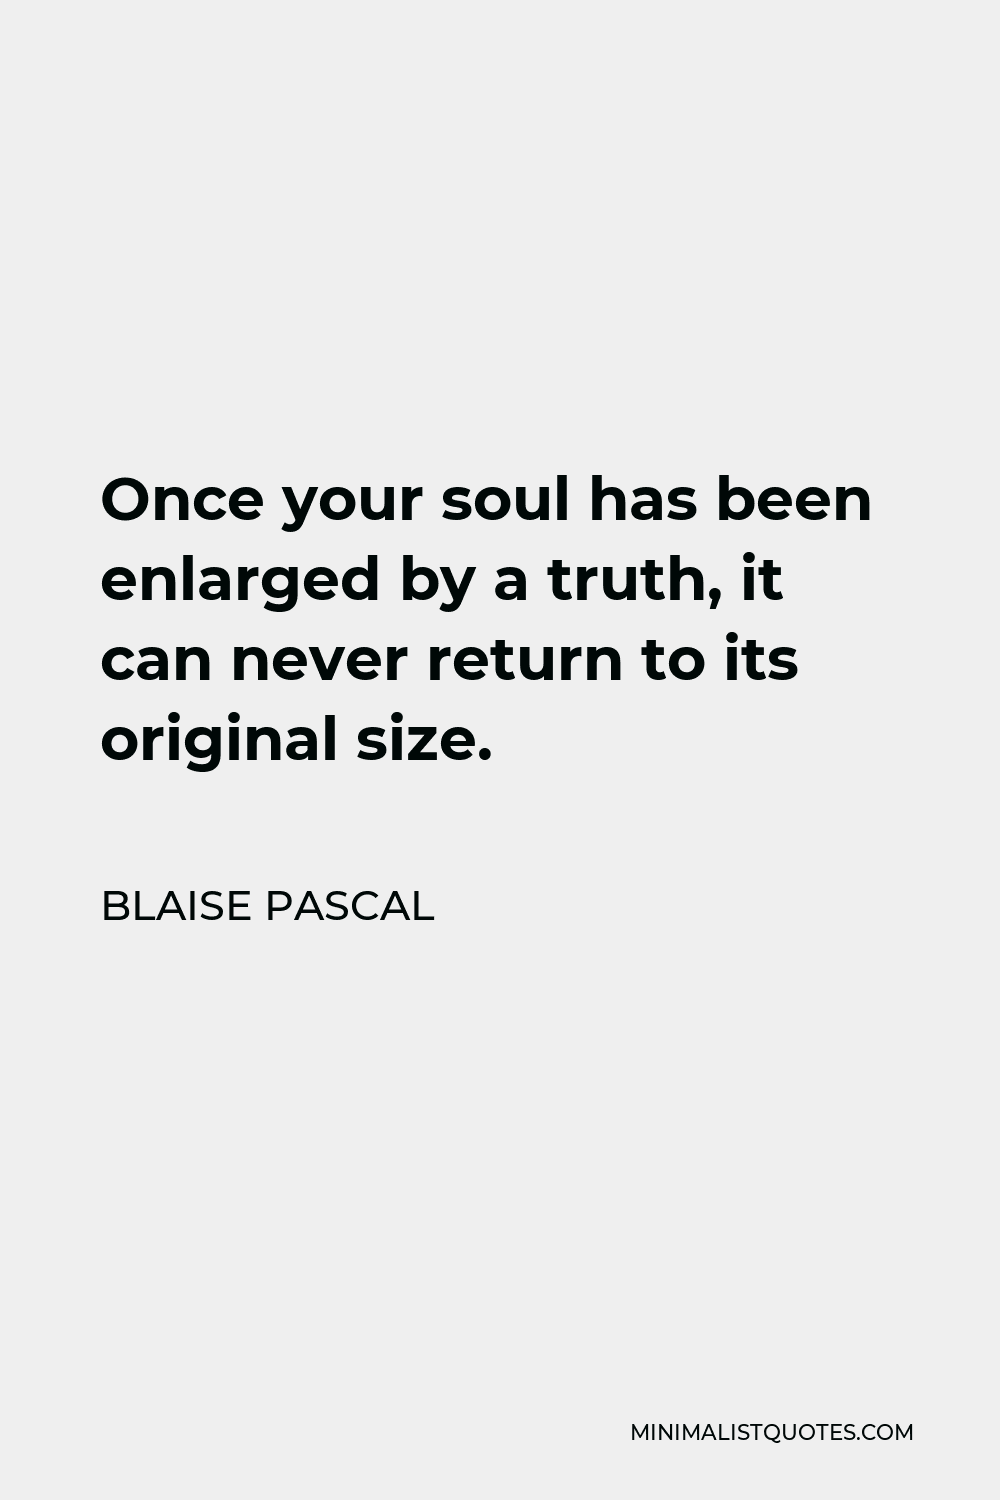 Blaise Pascal Quote - Once your soul has been enlarged by a truth, it can never return to its original size.